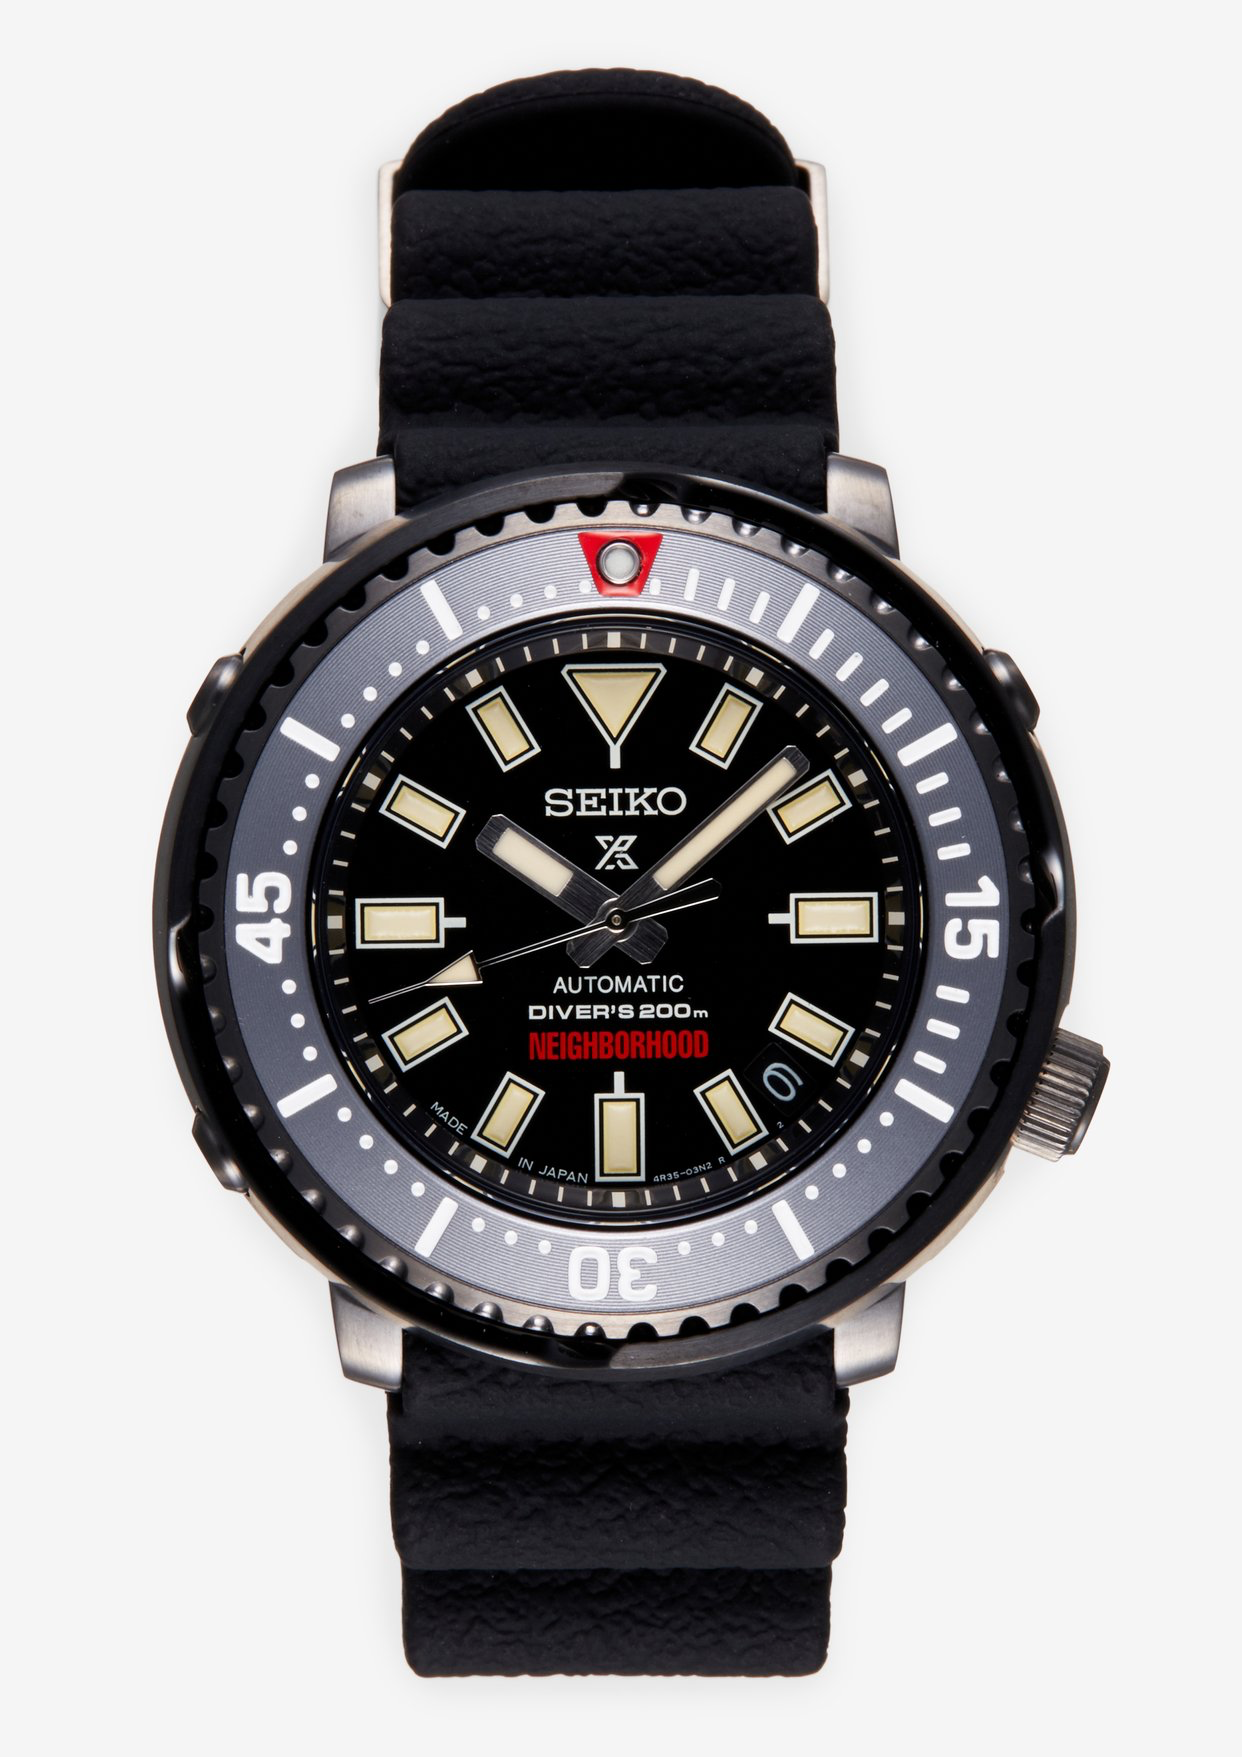 The Seiko x Neighborhood dive watch is awesome. Here are 5 watches that  (maybe) inspired it including Tudor, Rolex and more - Time and Tide Watches